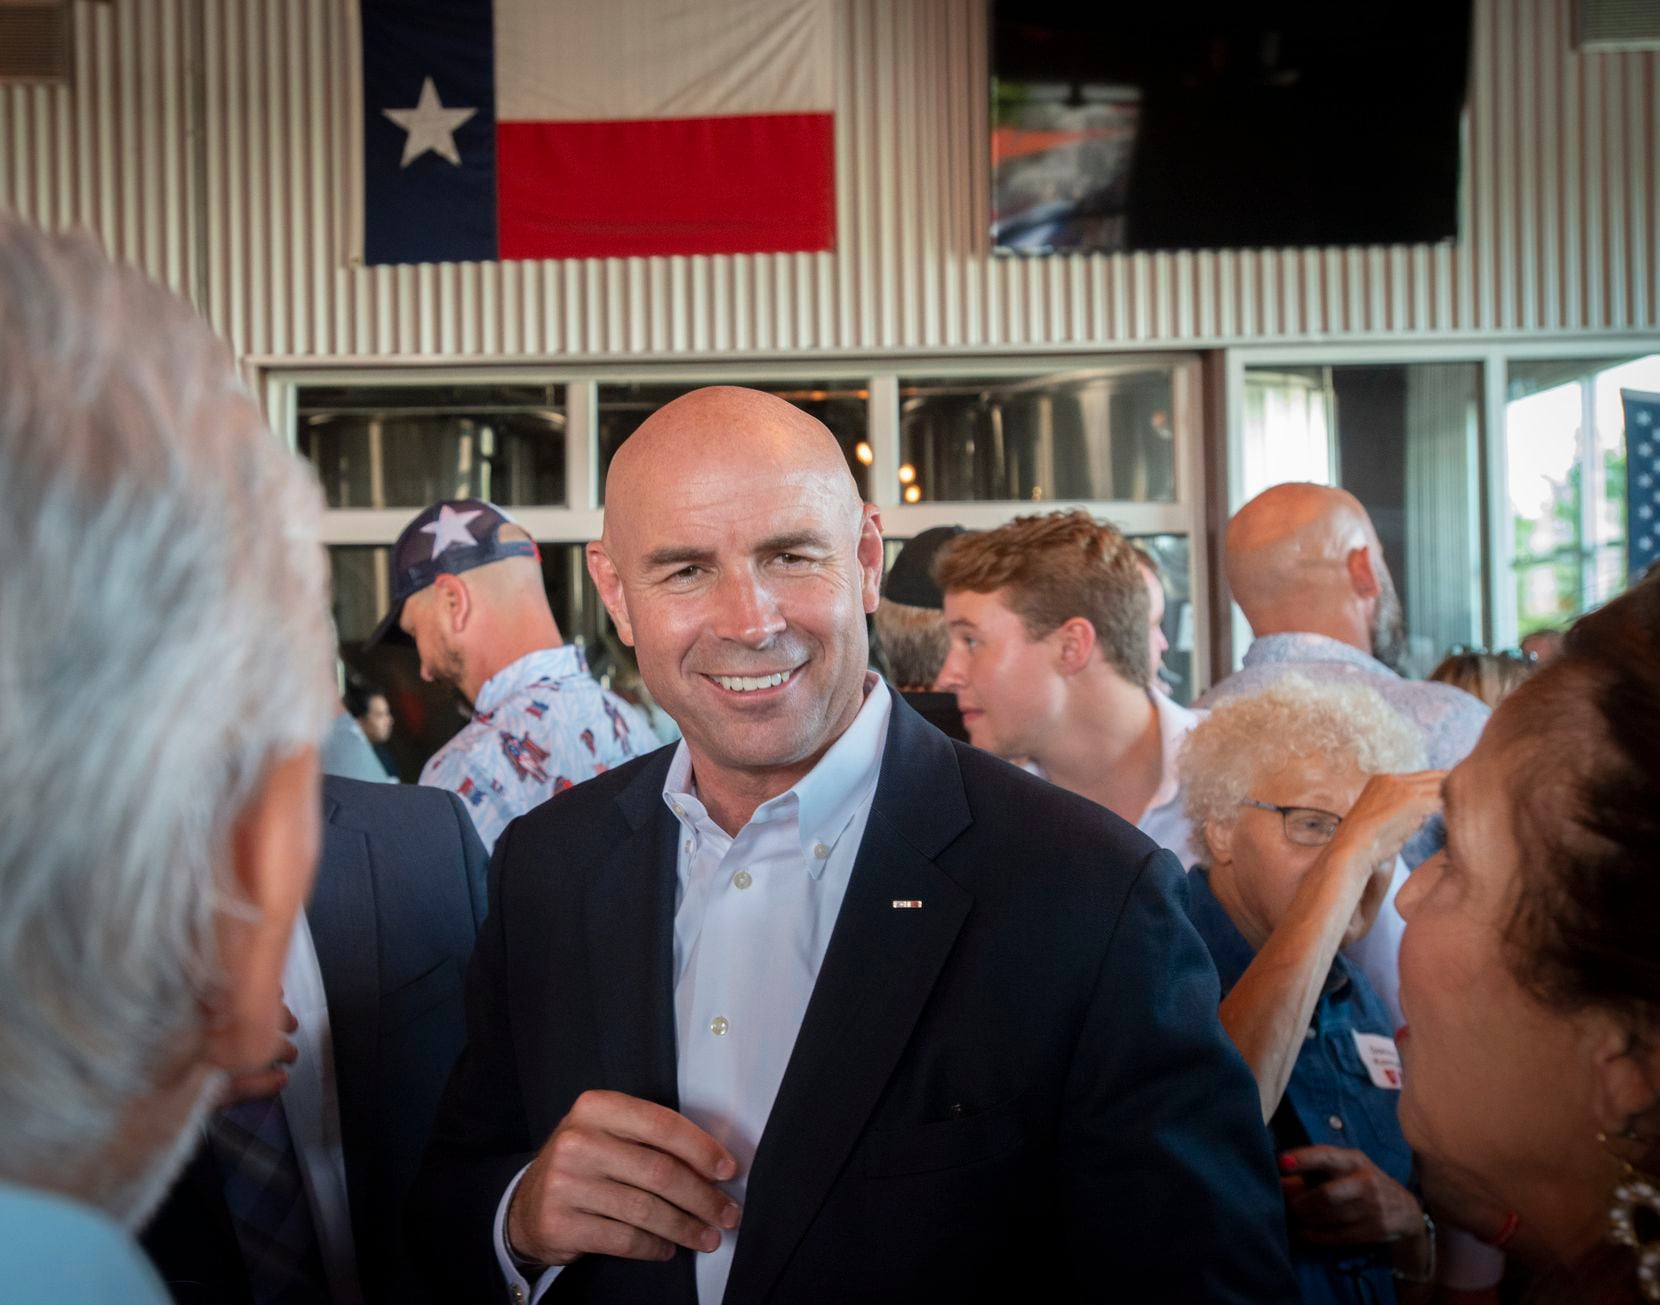 Congressional District 6 candidate Jake Ellzey speaks to supporters during an evening fundraiser at the Legal Draft in Arlington, Texas on July 14, 2021. (Robert W. Hart / Special Contributor)